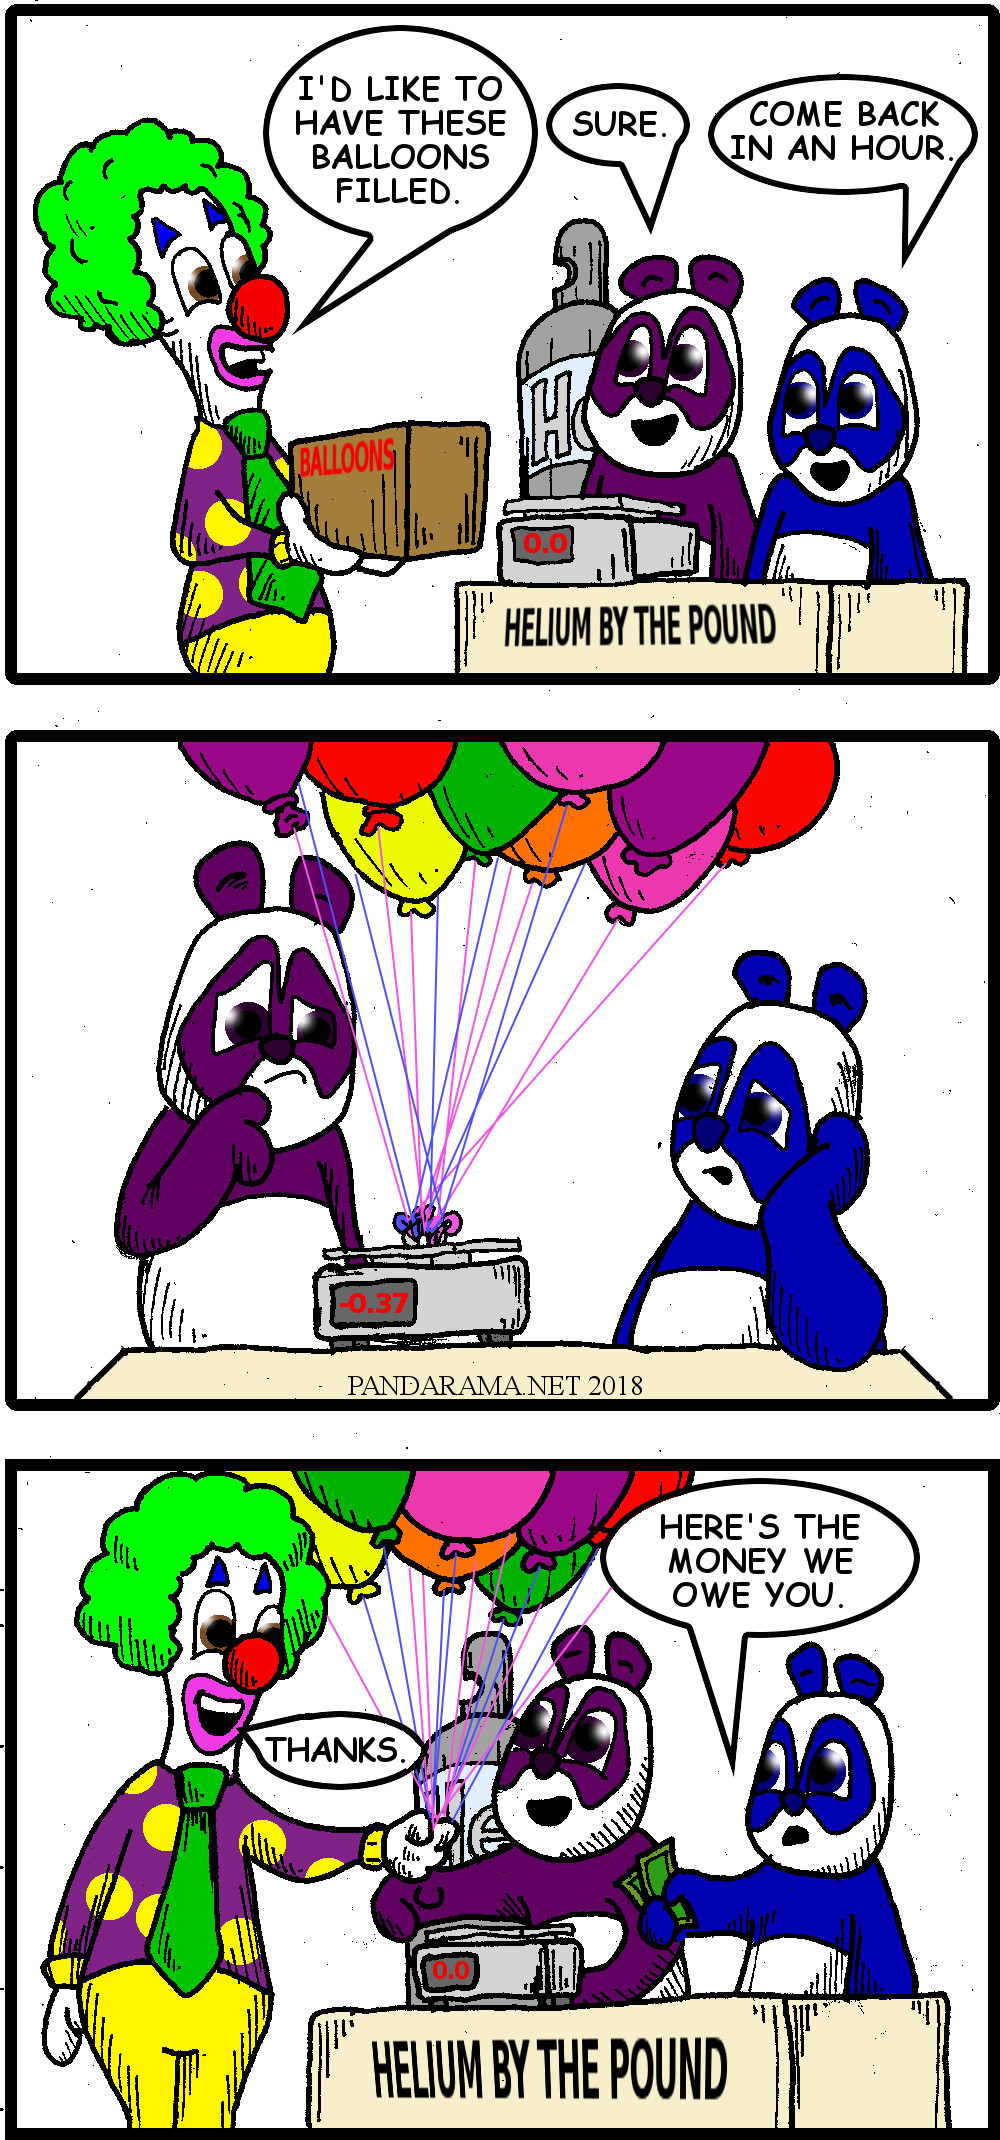 pandas lose money on a balloon inflation station selling helium by the pound.